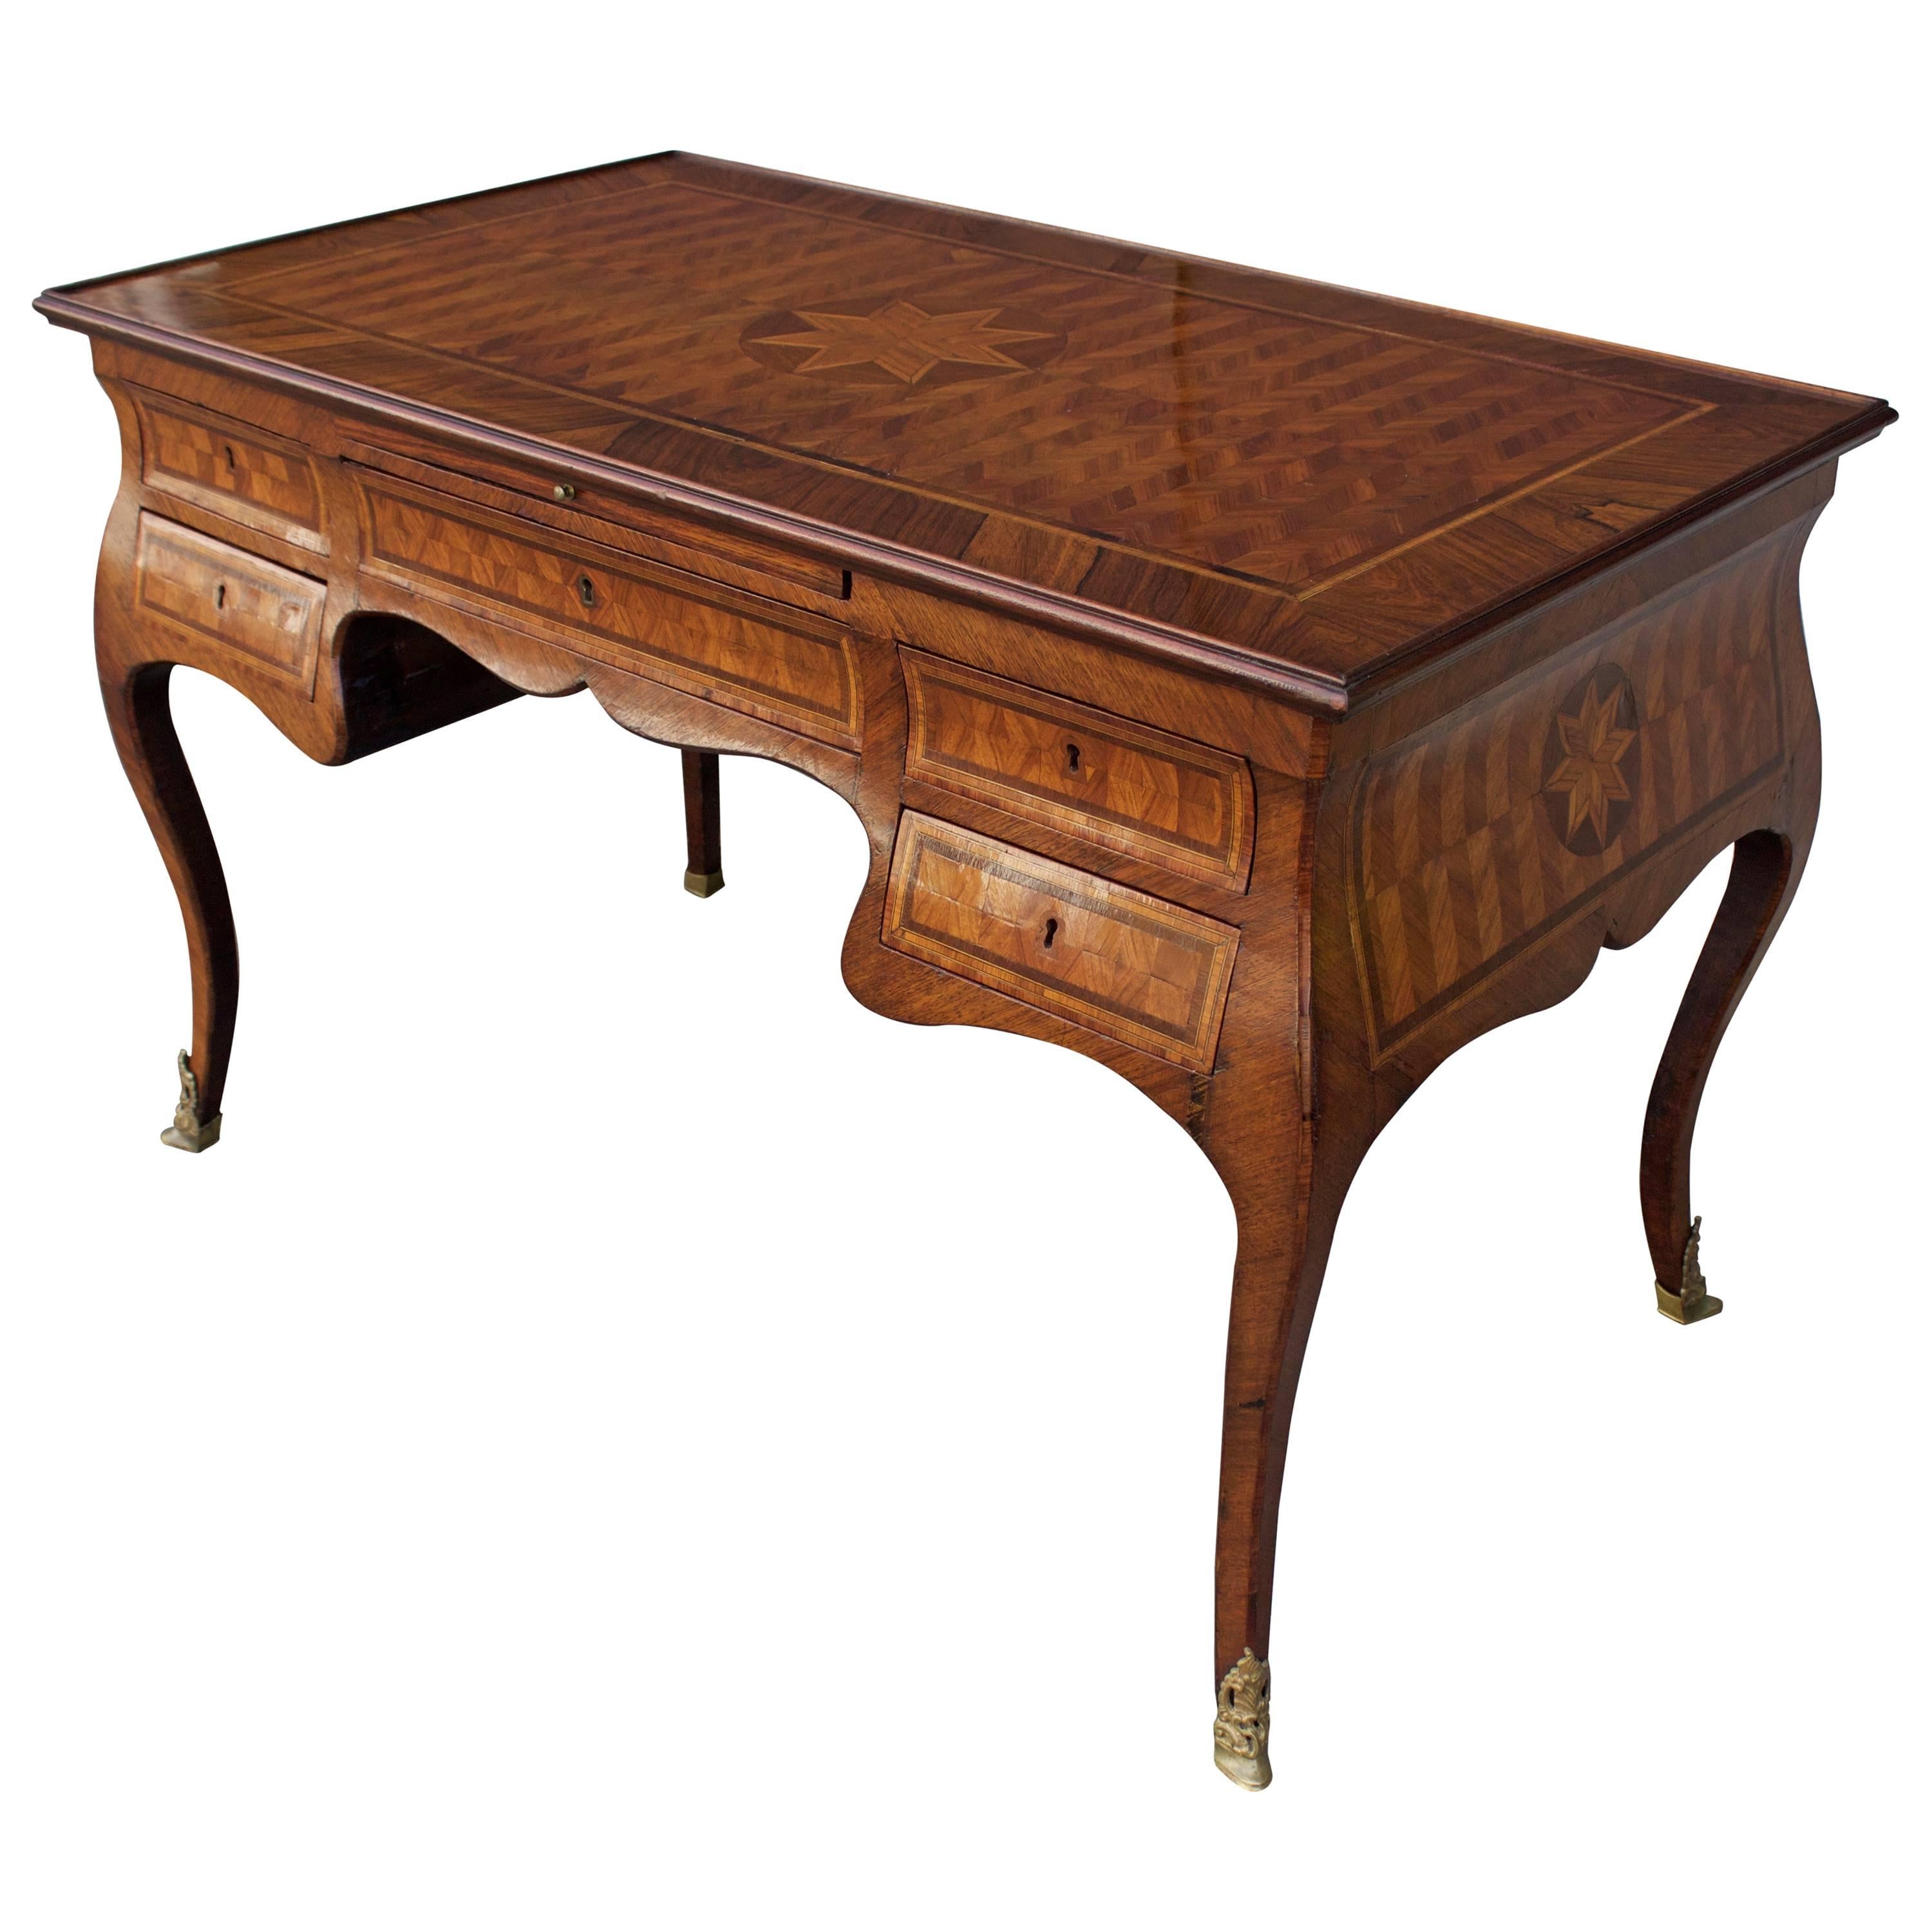 Naples Central Walnut and Kingwood Inlaid Desk